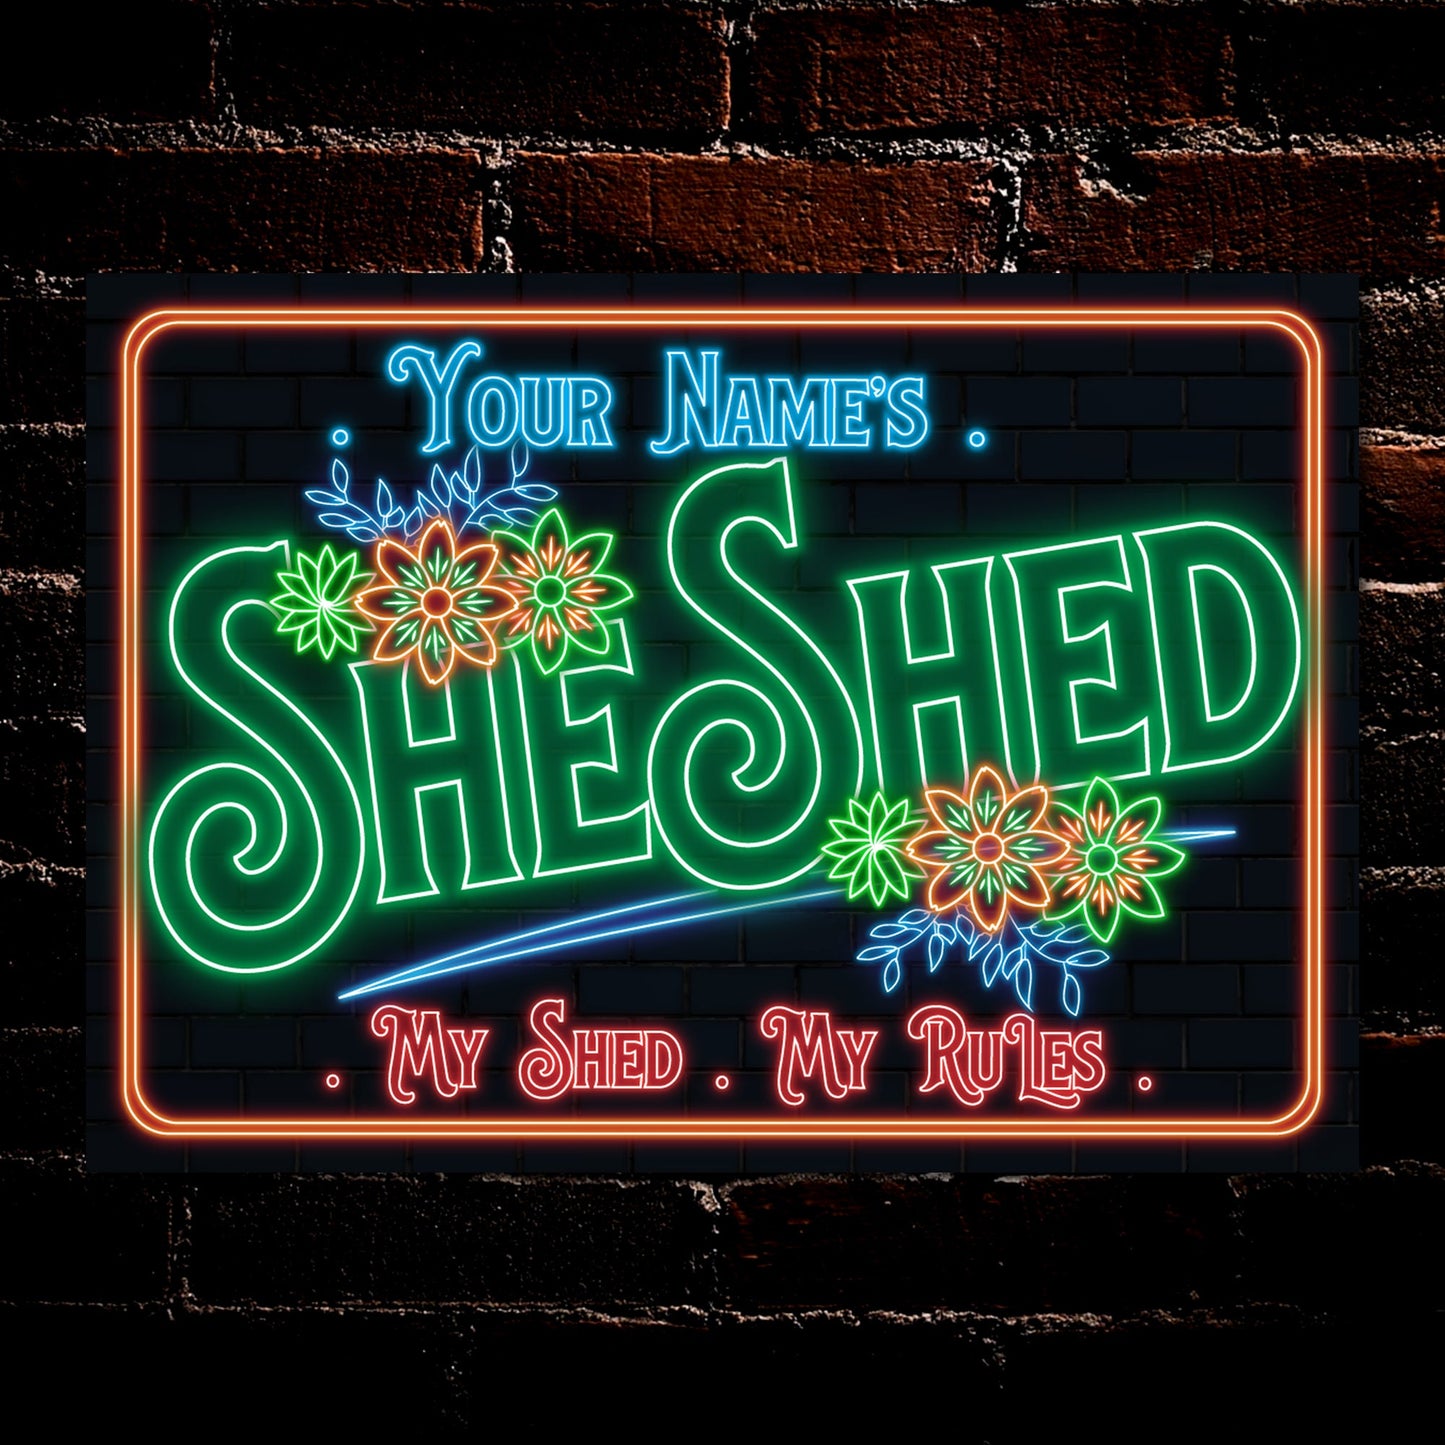 PERSONALISED She Shed Metal Plaque Garden Door Accessory Neon Effect Signs Wall Décor 0515